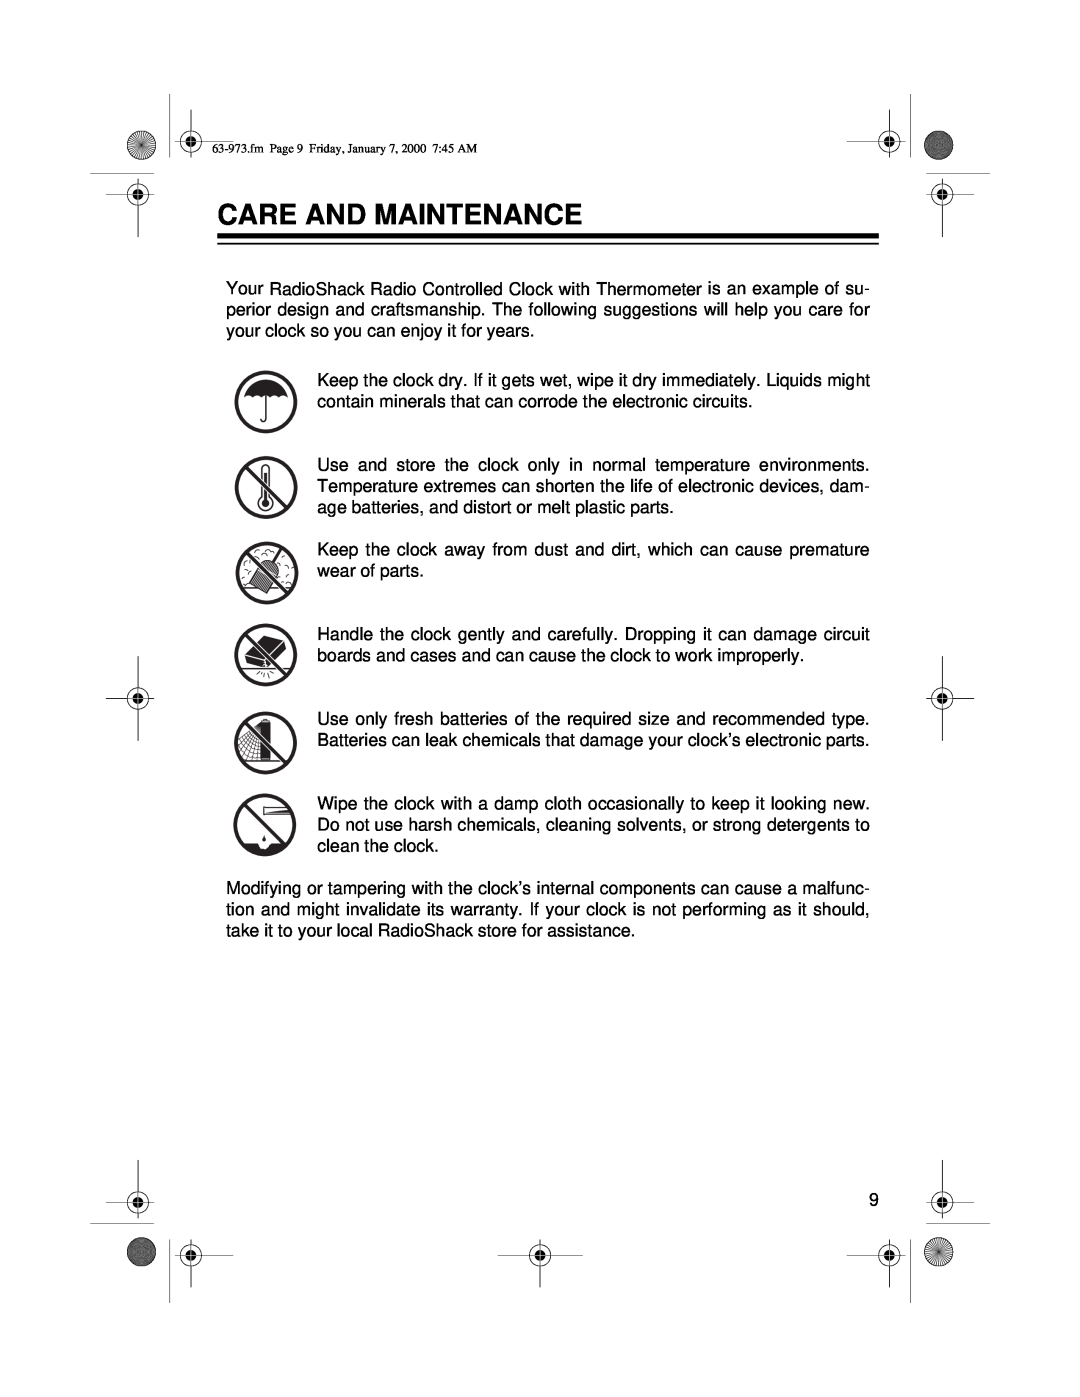 Radio Shack 63-973 owner manual Care And Maintenance, fm Page 9 Friday, January 7, 2000 745 AM 